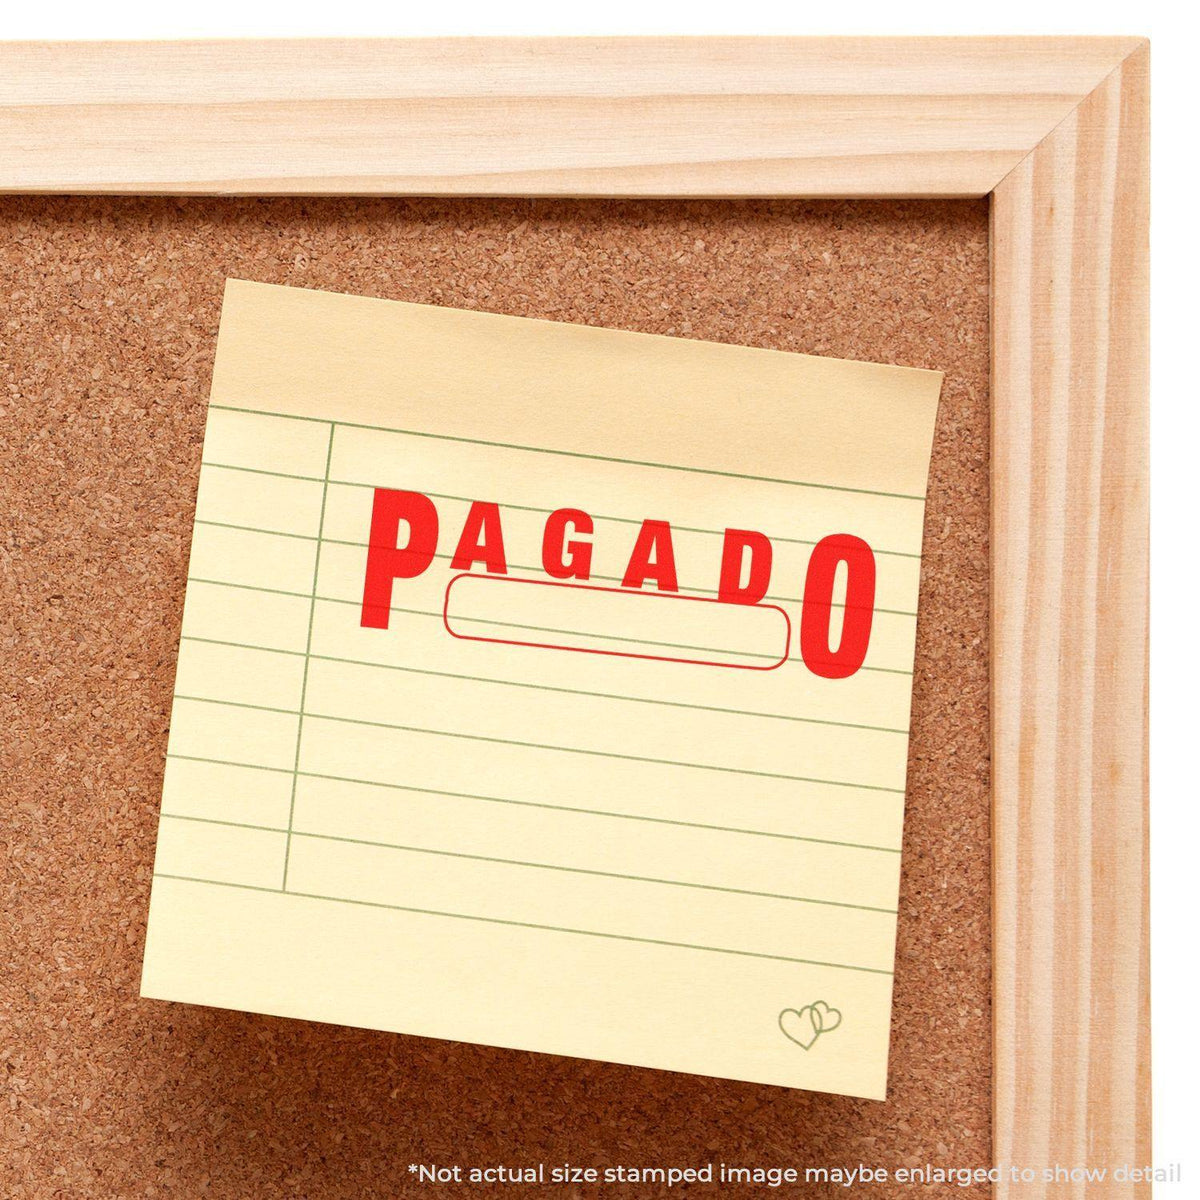 Large Pagado with Box Rubber Stamp In Use Photo